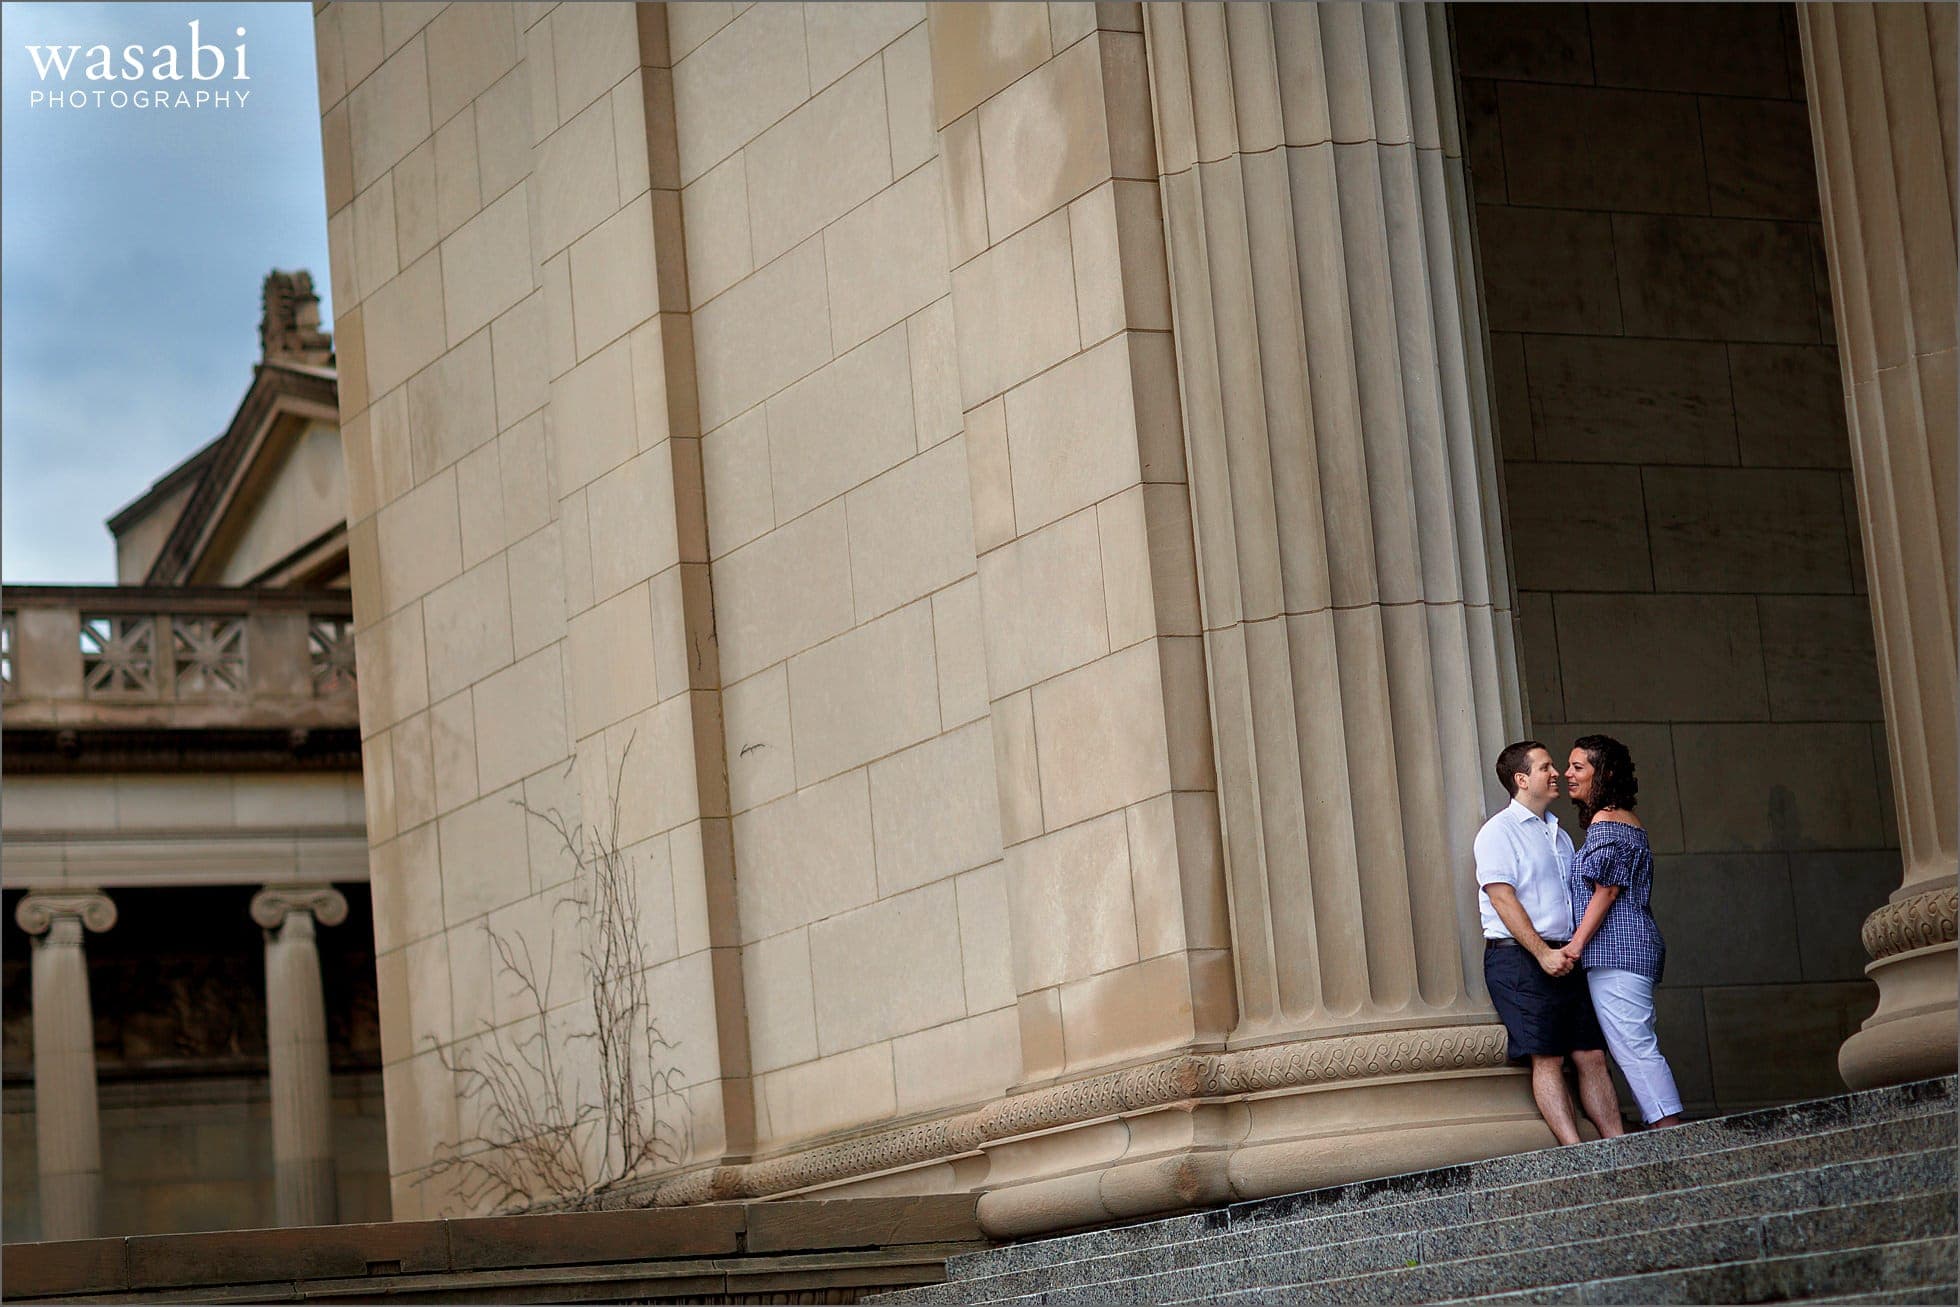 A couple laughs during their engagement session on the steps at The Museum of Science and Industry near Chicagos Jackson Park and Hyde Park neighborhood between Lake Michigan and The University of Chicago.